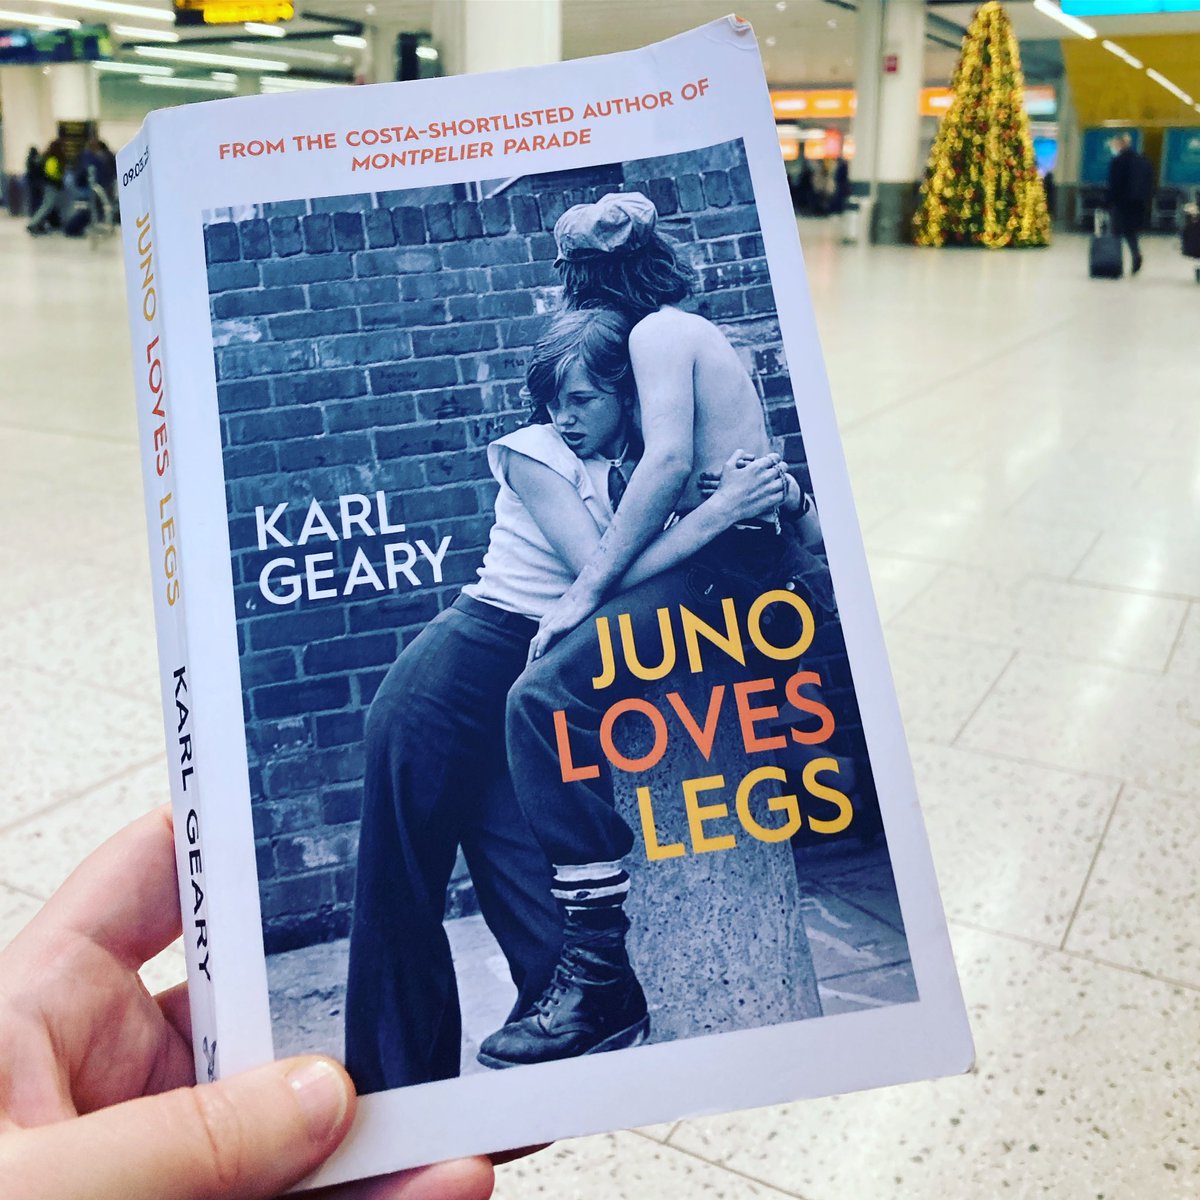 the new novel from @GearyKarl has absolutely destroyed me. I’m going to be thinking about Juno and Legs for the rest of the week. It’s published early March by @harvillsecker and it’s going to break your heart in the very best way #JunoLovesLegs